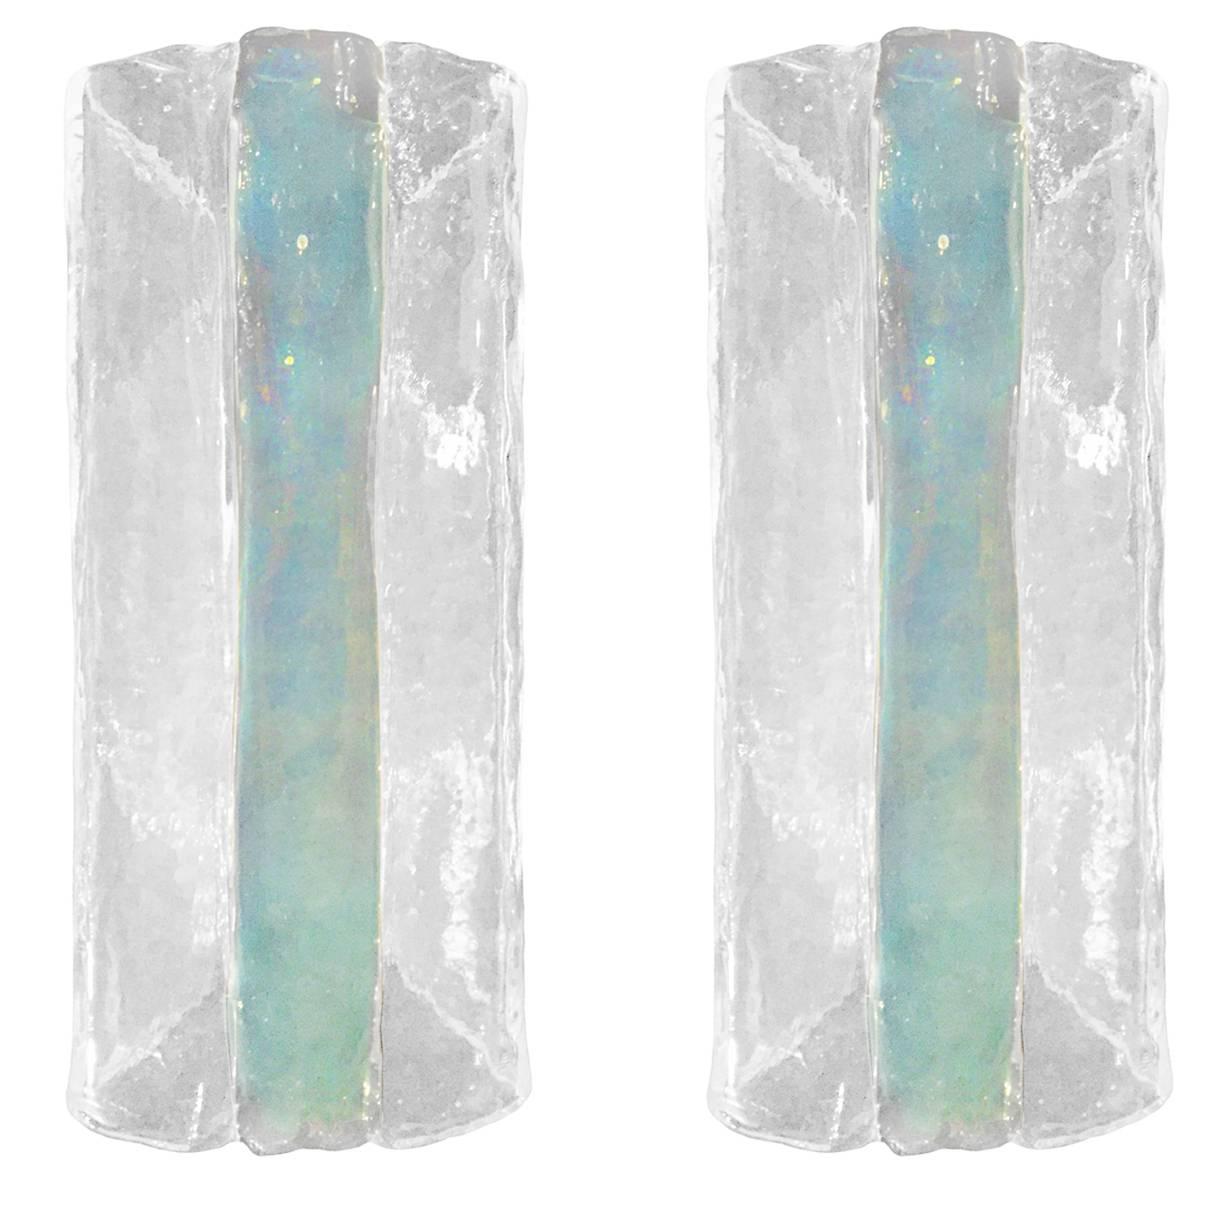 Pair of 1970s Murano Glass Sconces with Opalescent Center Detail